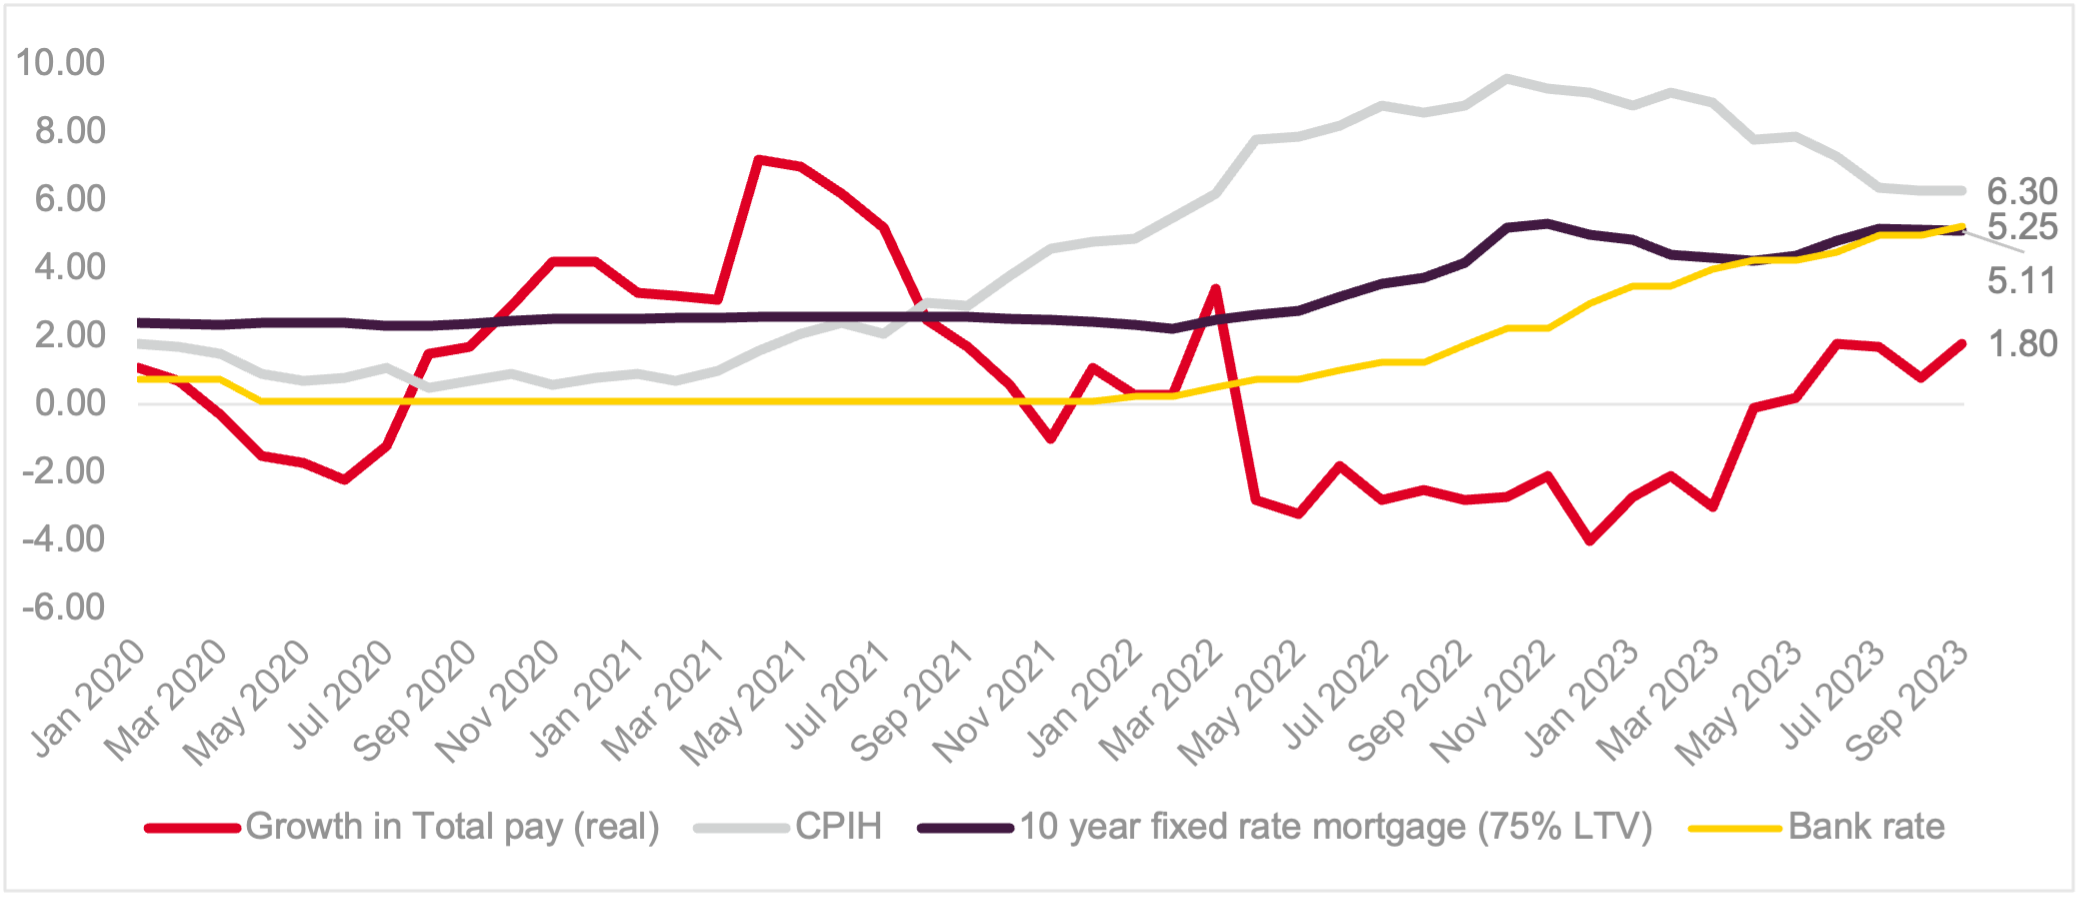 Fig. 1- Climbing Mortgage Rates vs. Minimal Growth in Total Real Pay Amidst a Cooling, High-Inflation Environment